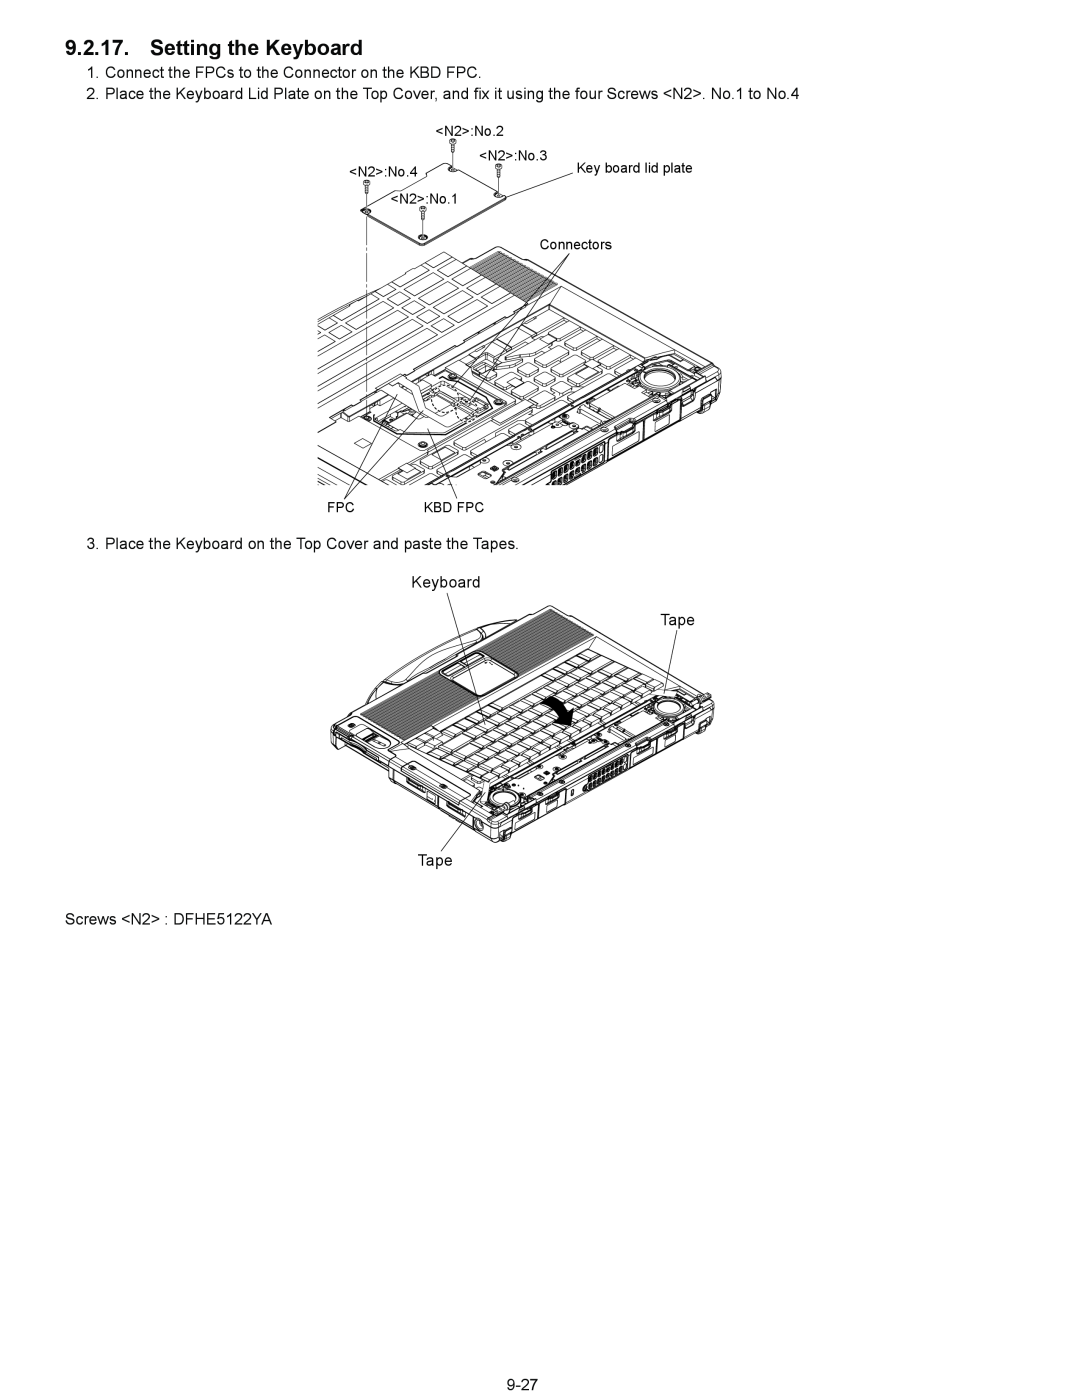 Panasonic CF-52EKM 1 D 2 M service manual Setting the Keyboard, Connect the FPCs to the Connector on the KBD FPC, 9-27 